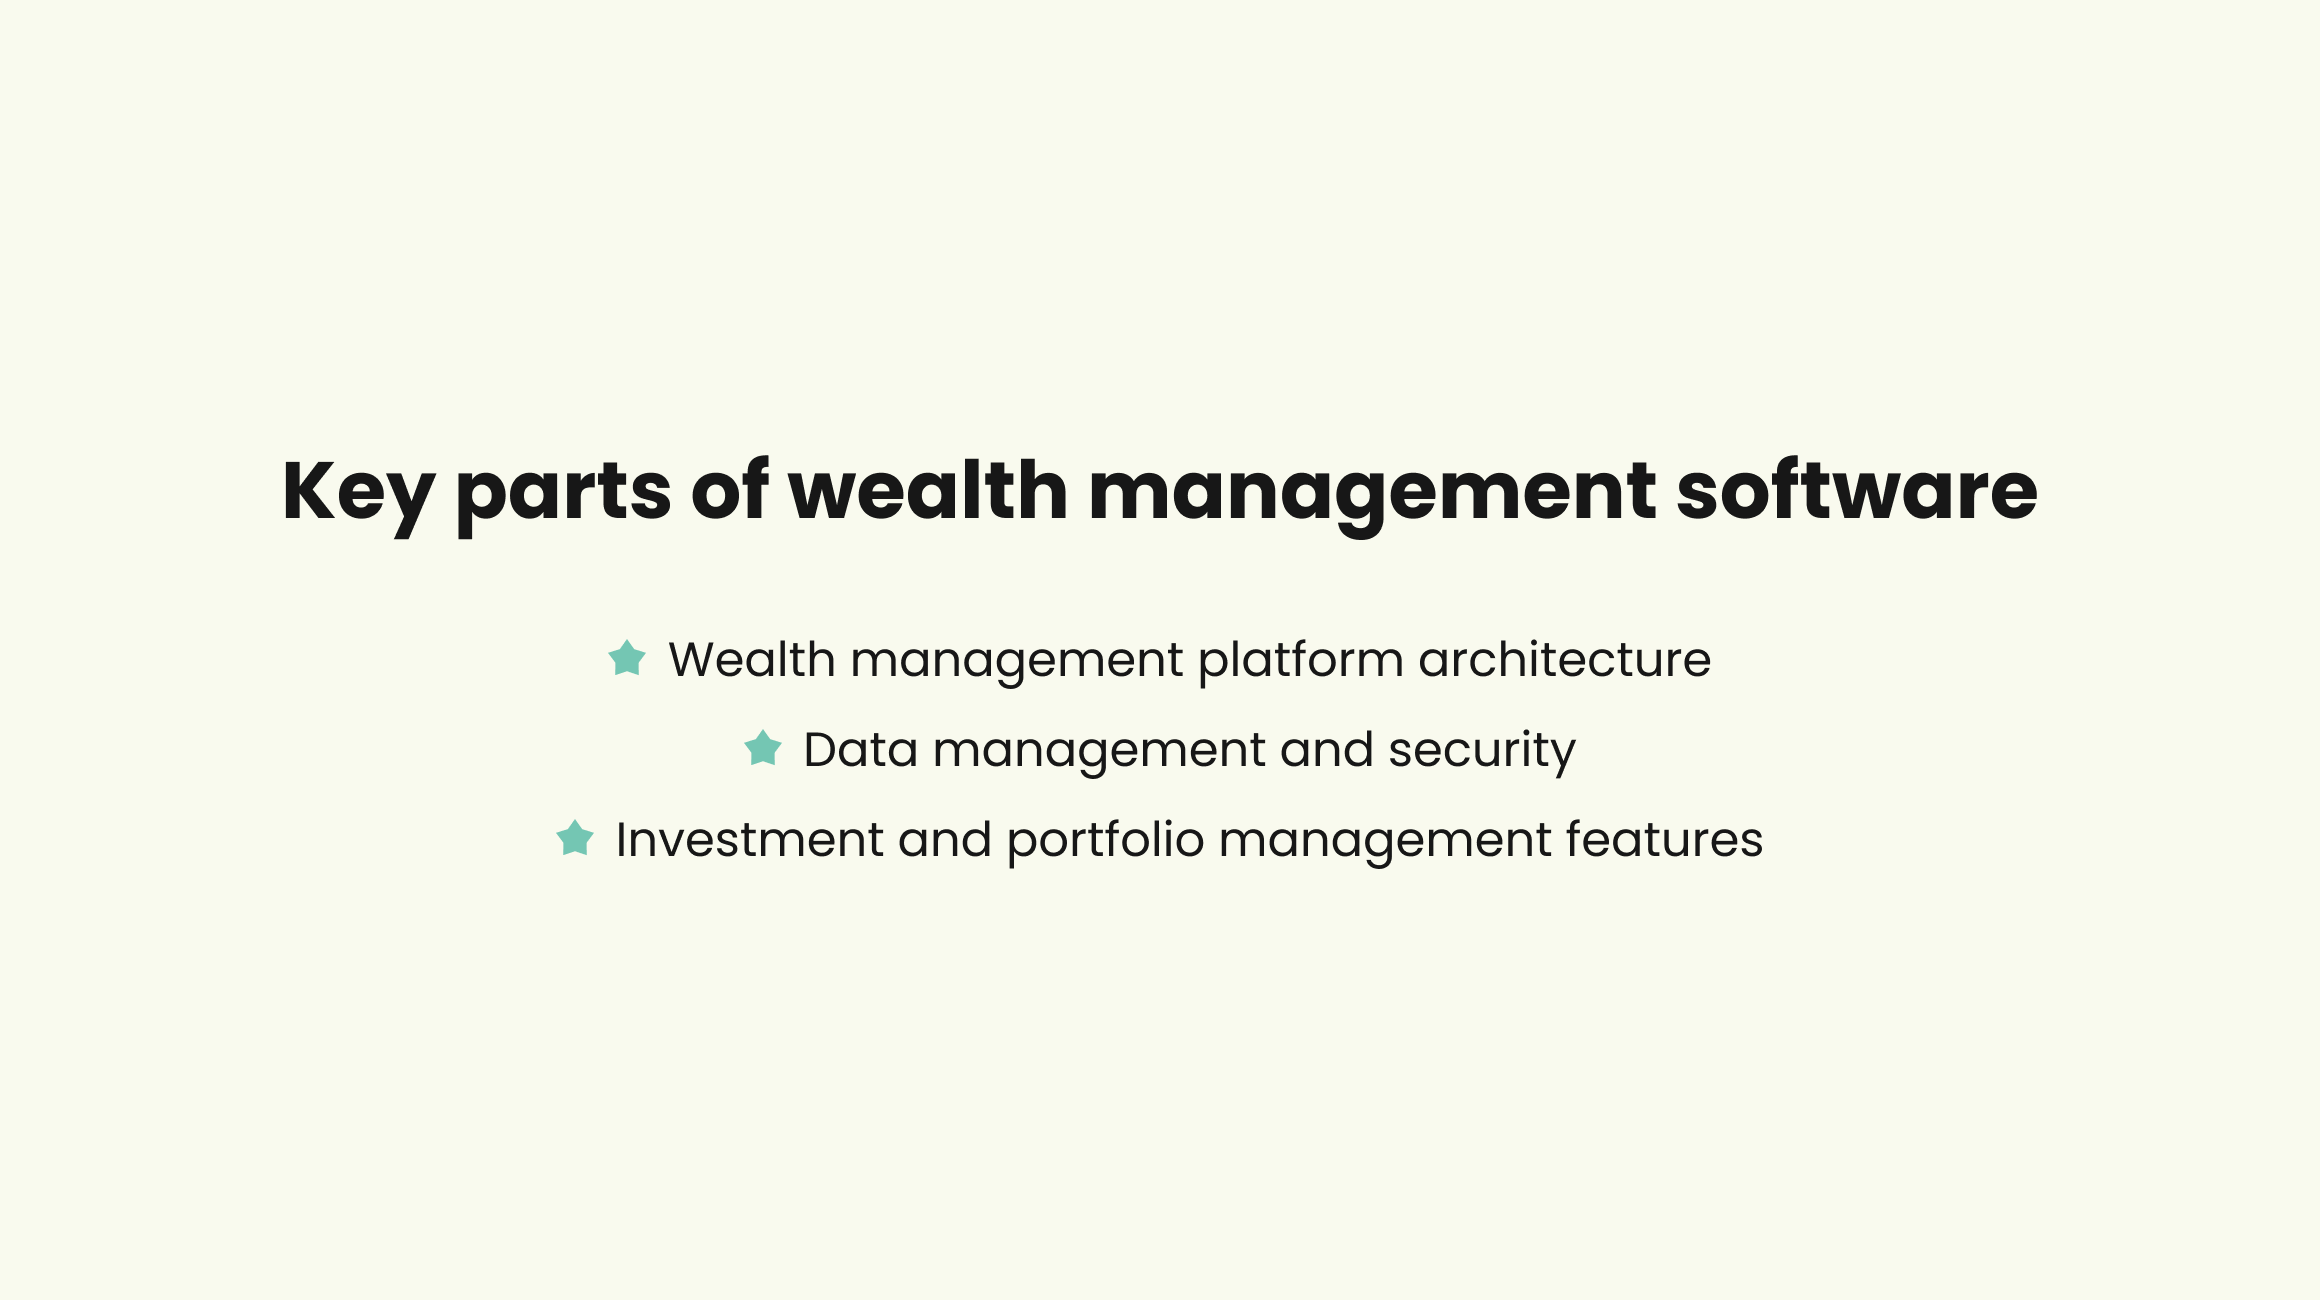 Key components of wealth management software